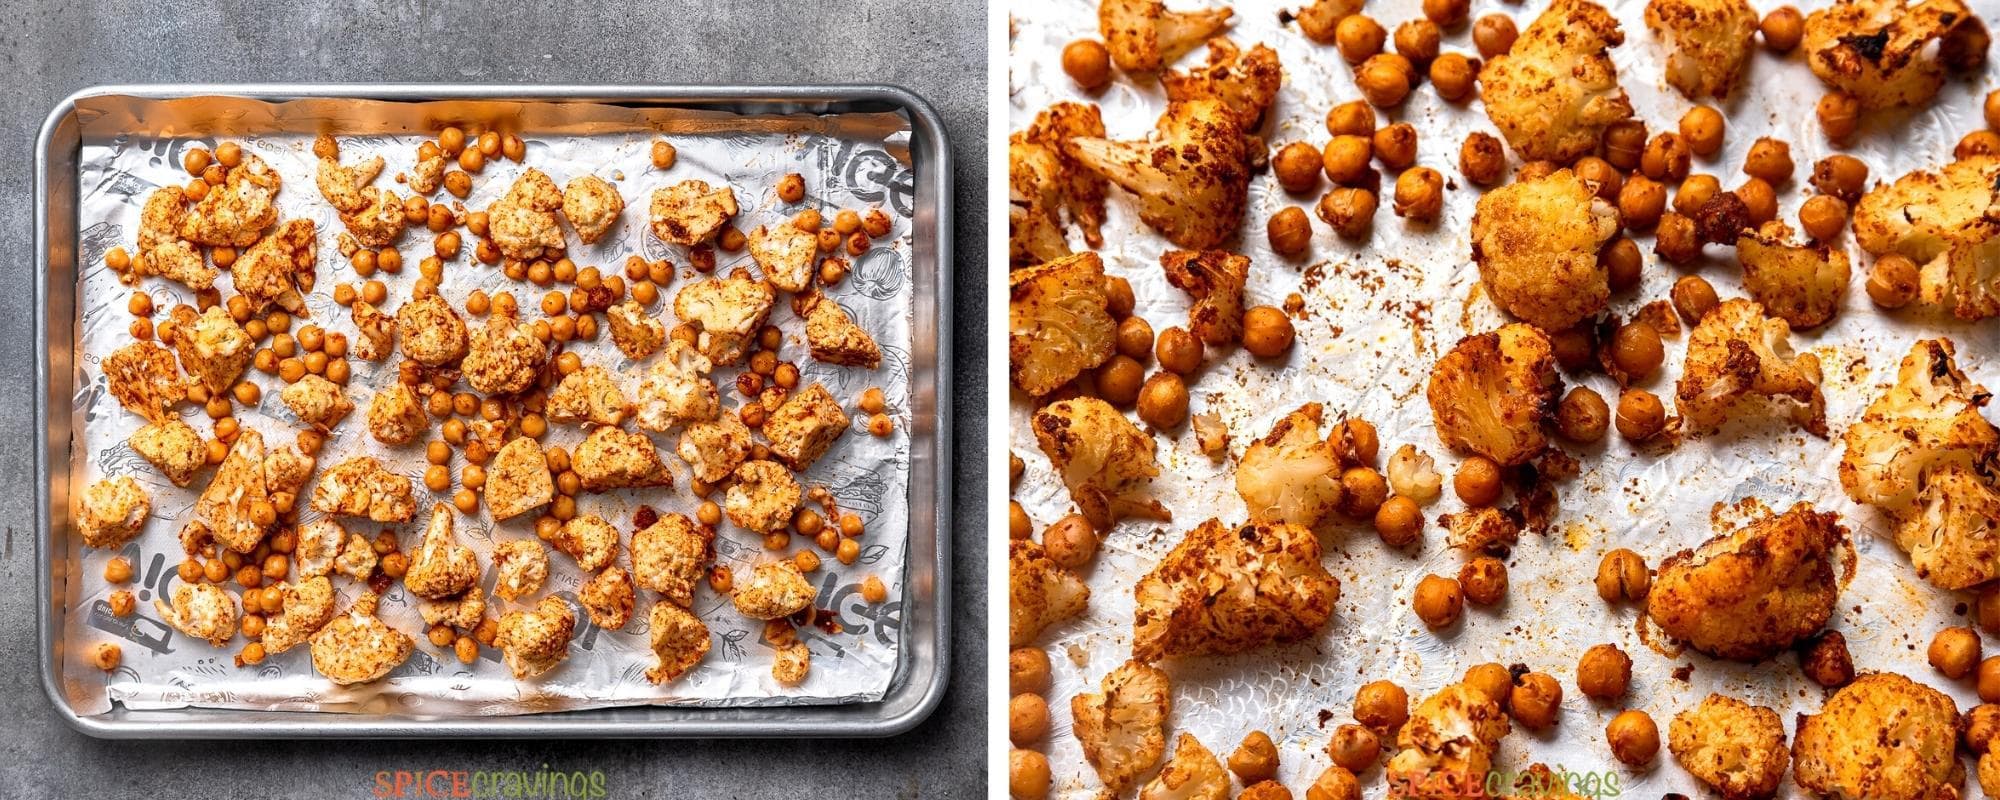 two step grid baking spiced cauliflower and chickpeas on baking sheet